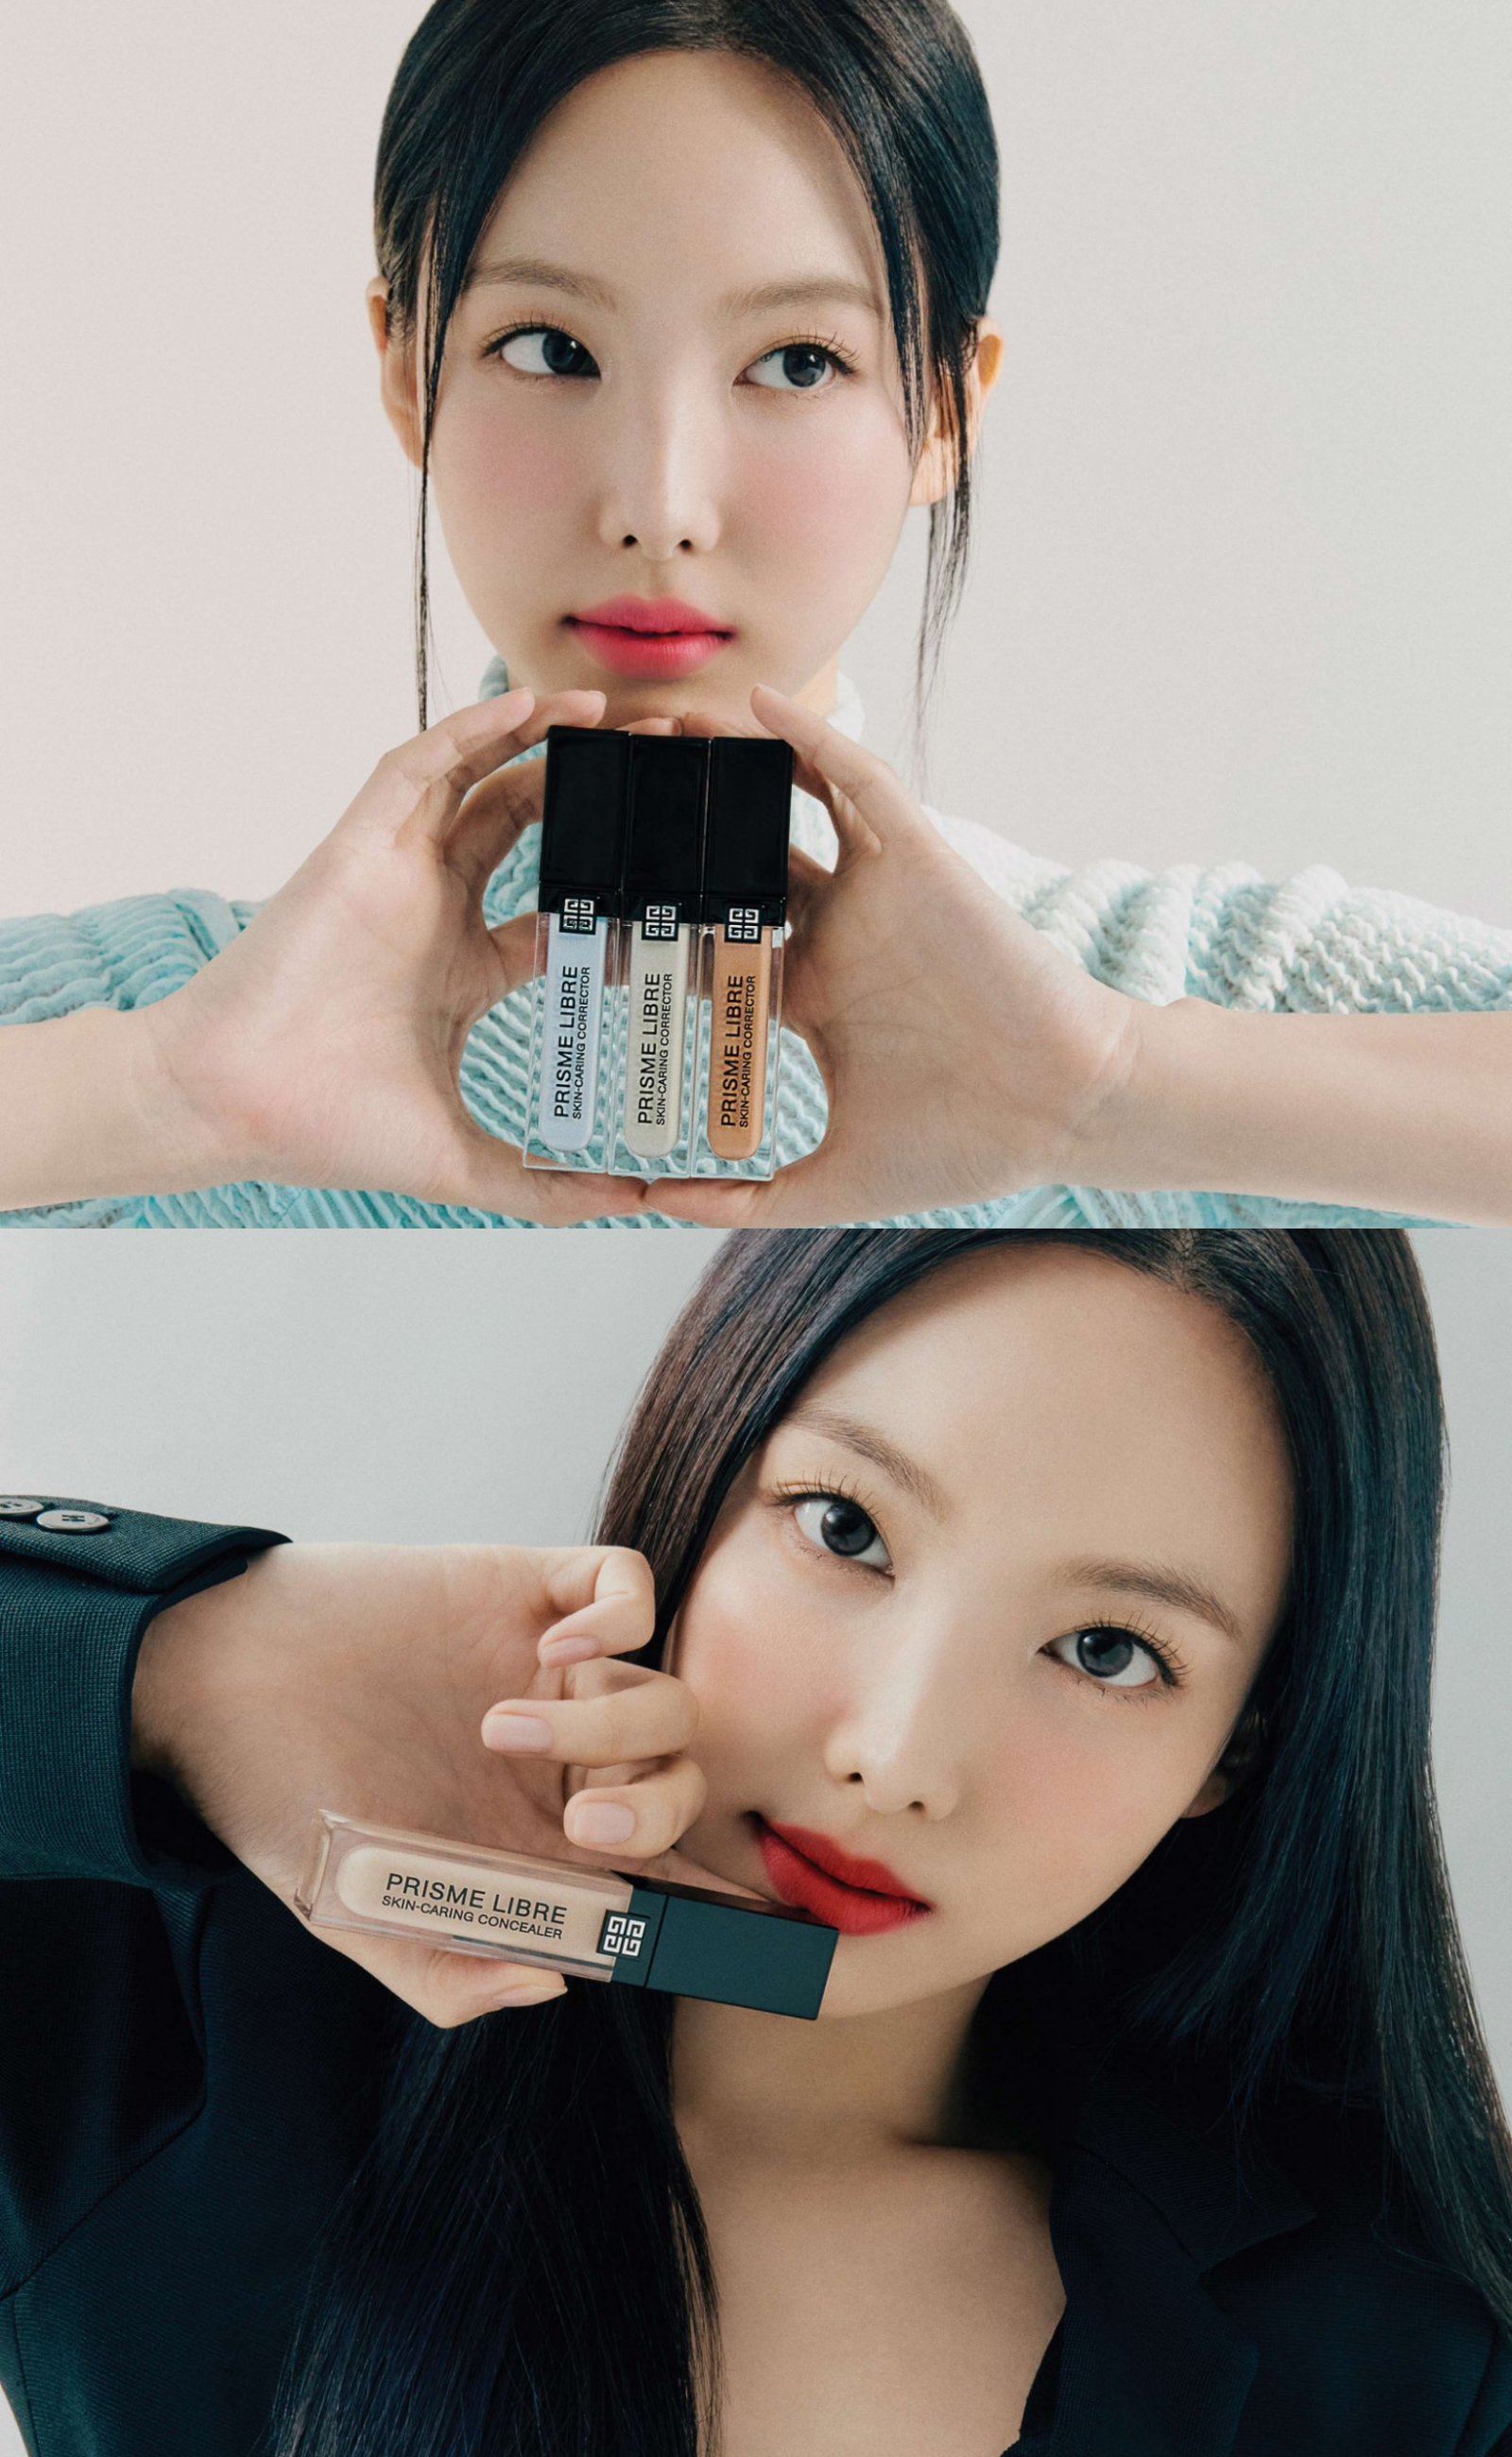 Givenchy Beauty names TWICE's Nayeon as its newest muse